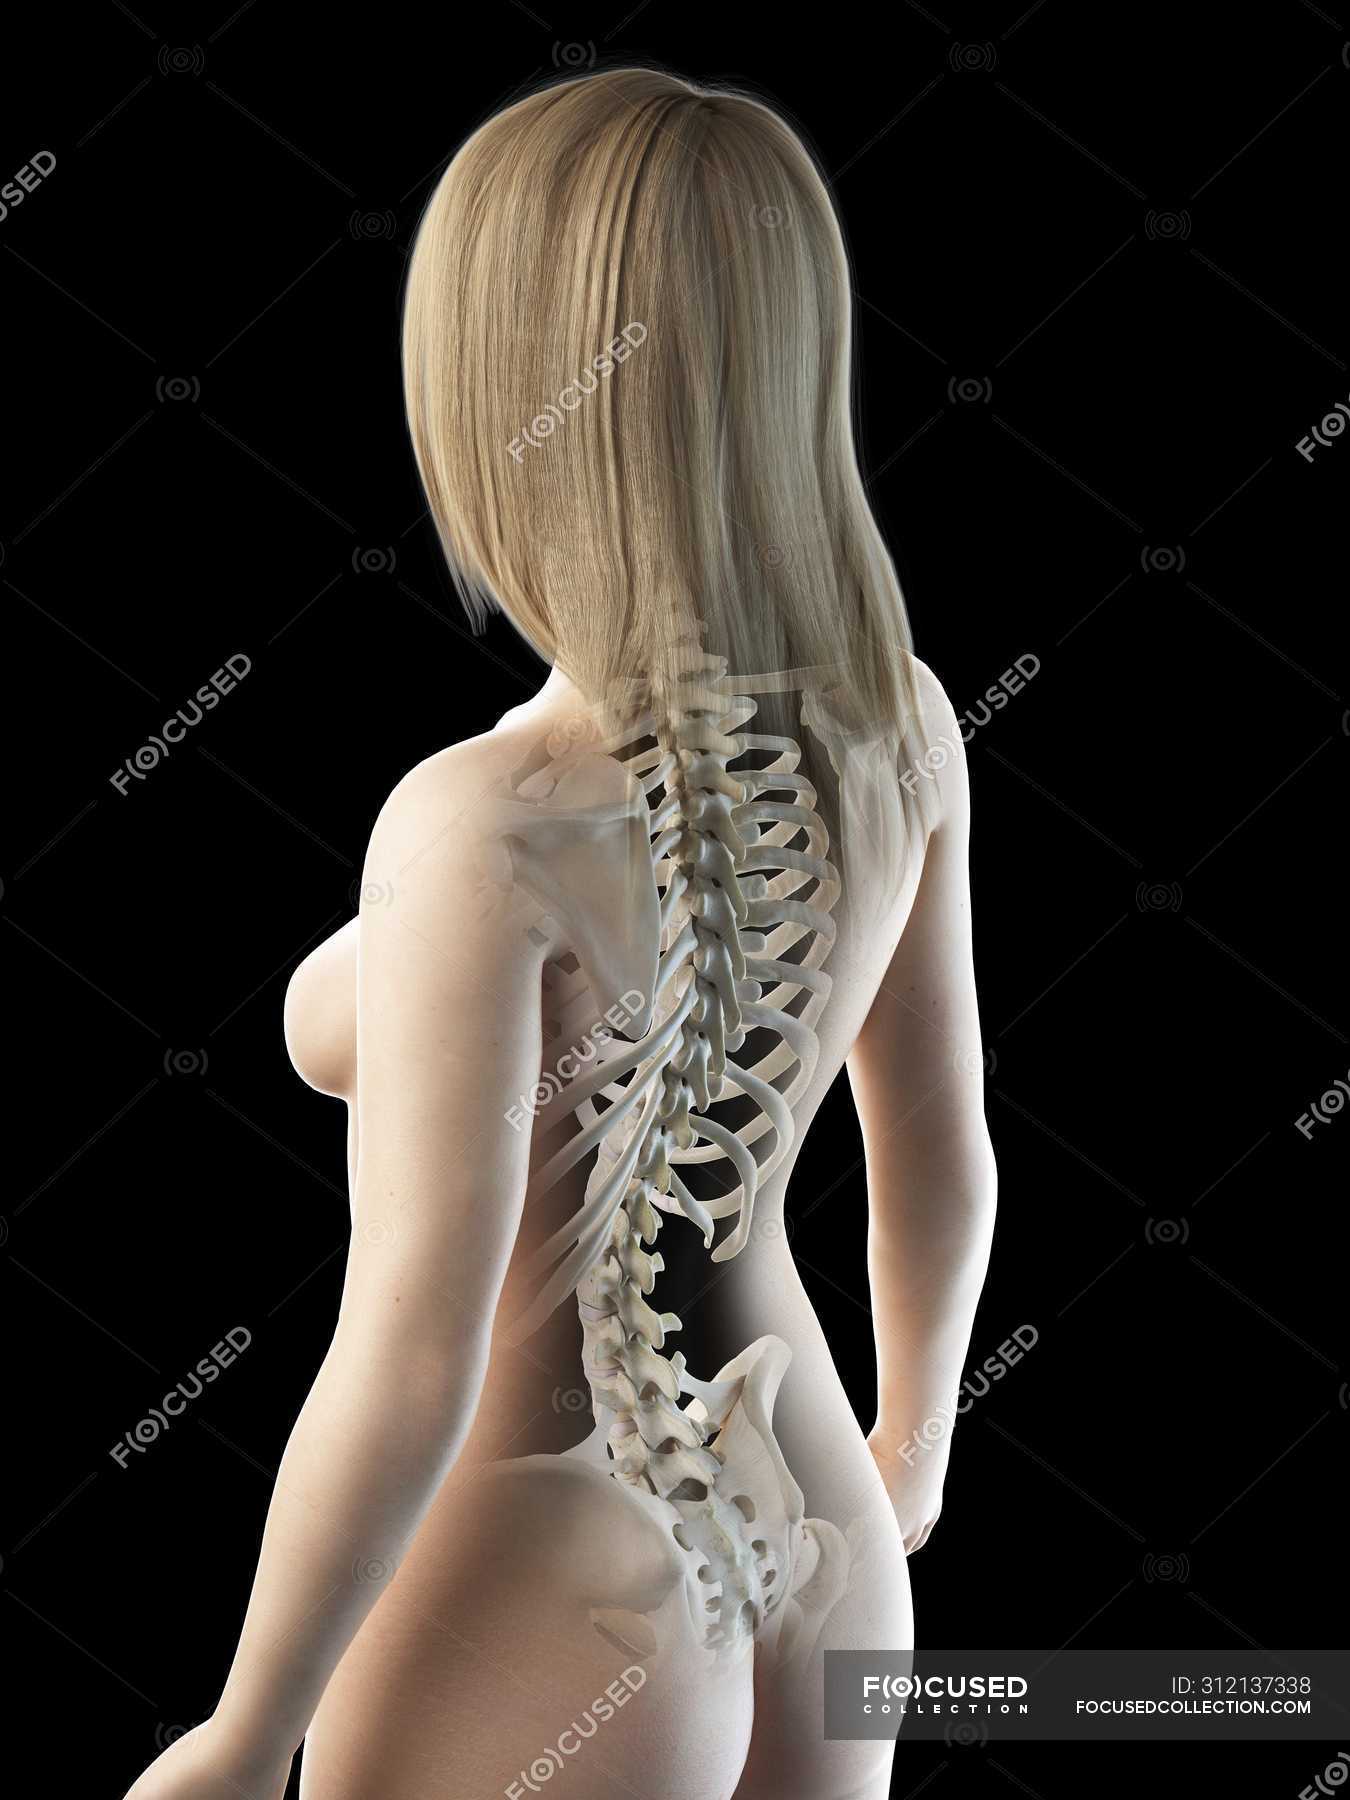 Abstract Female Body With Visible Back Bones Computer Illustration Healthy Vertebral Stock Photo 312137338